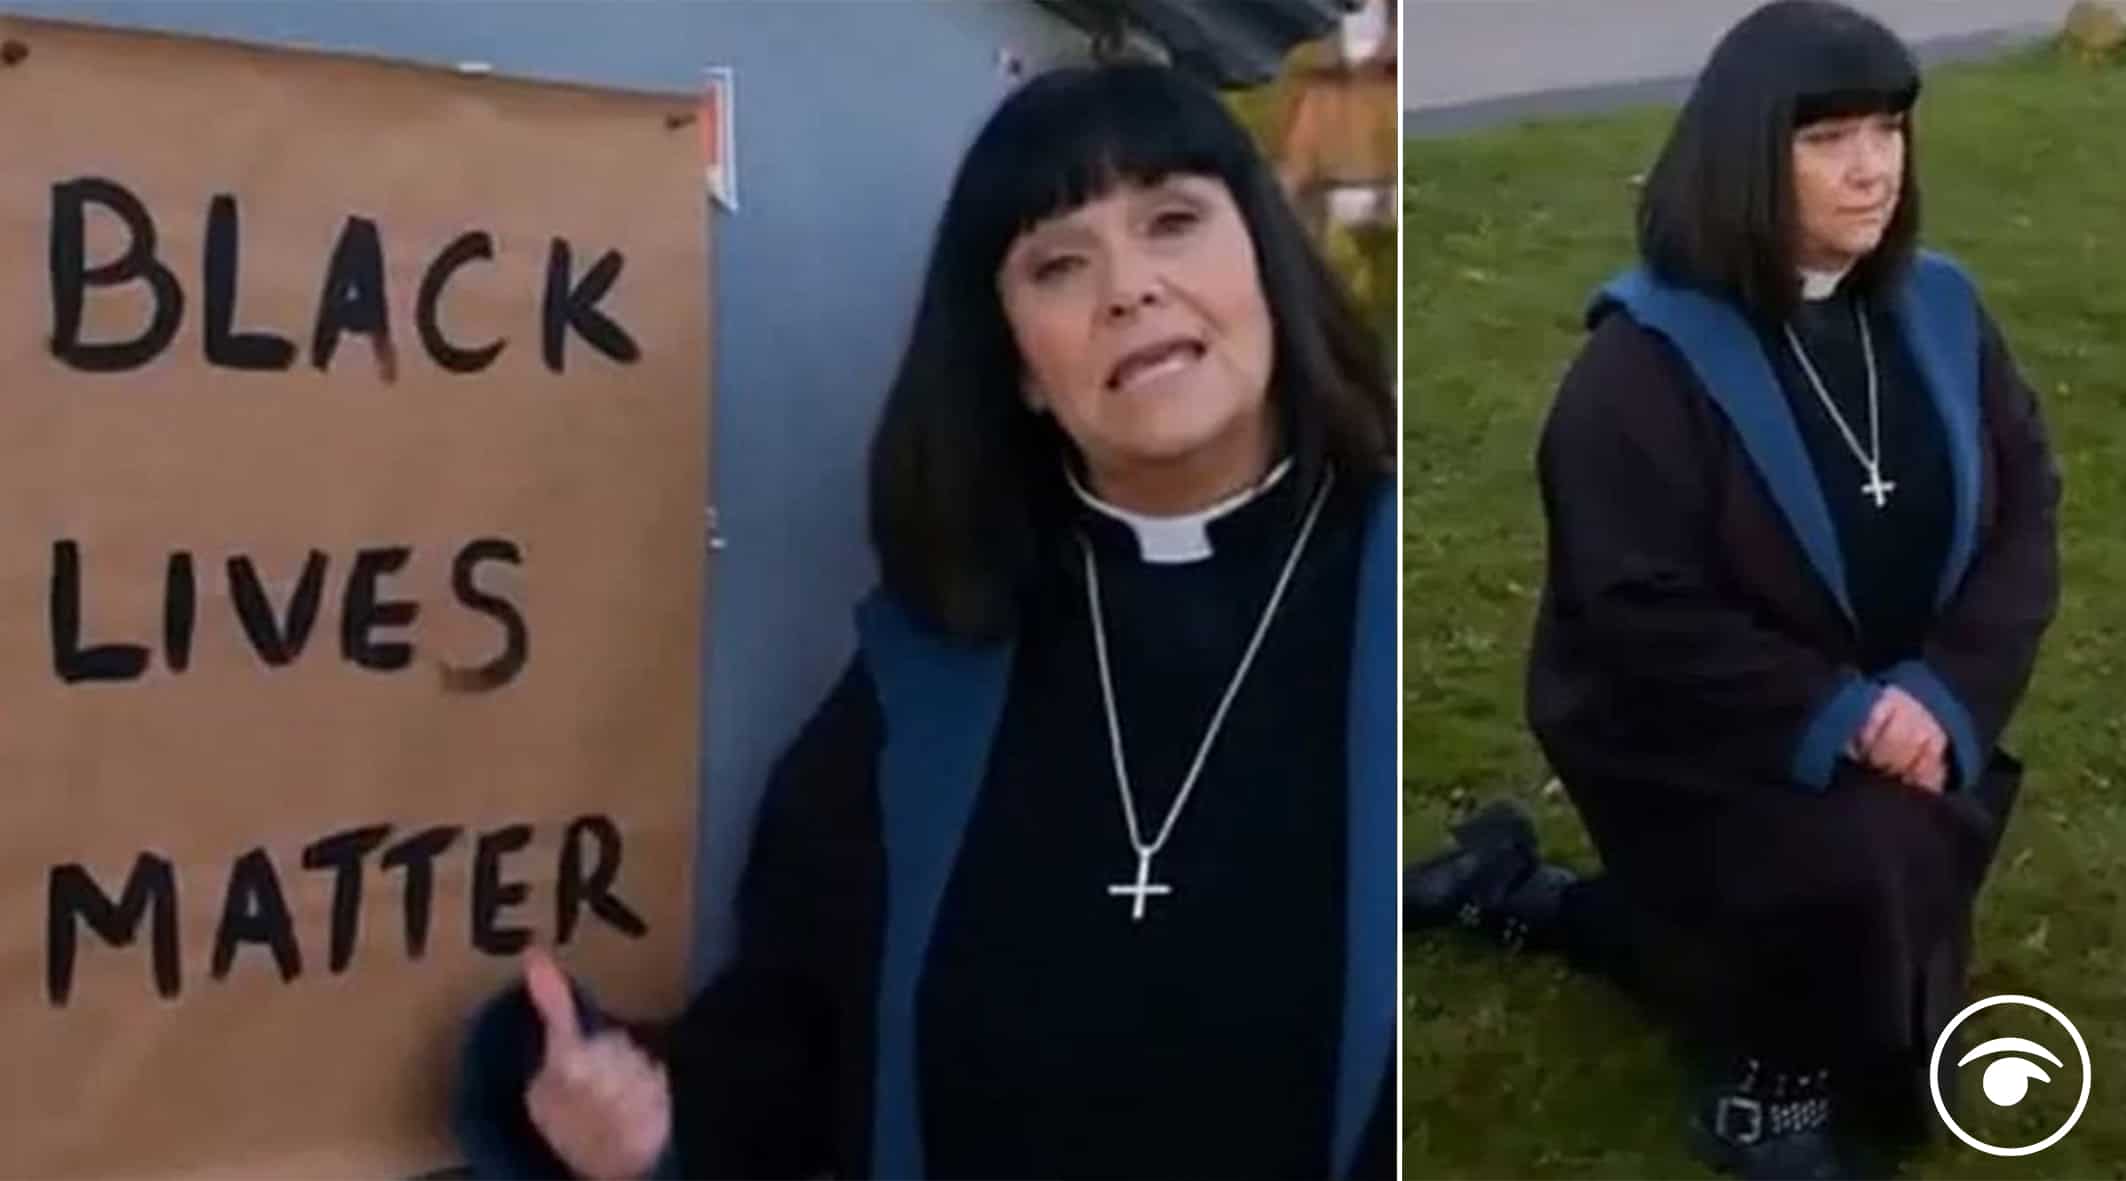 Right wing fury as Vicar of Dibley set to ‘take the knee’ and deliver BLM sermon